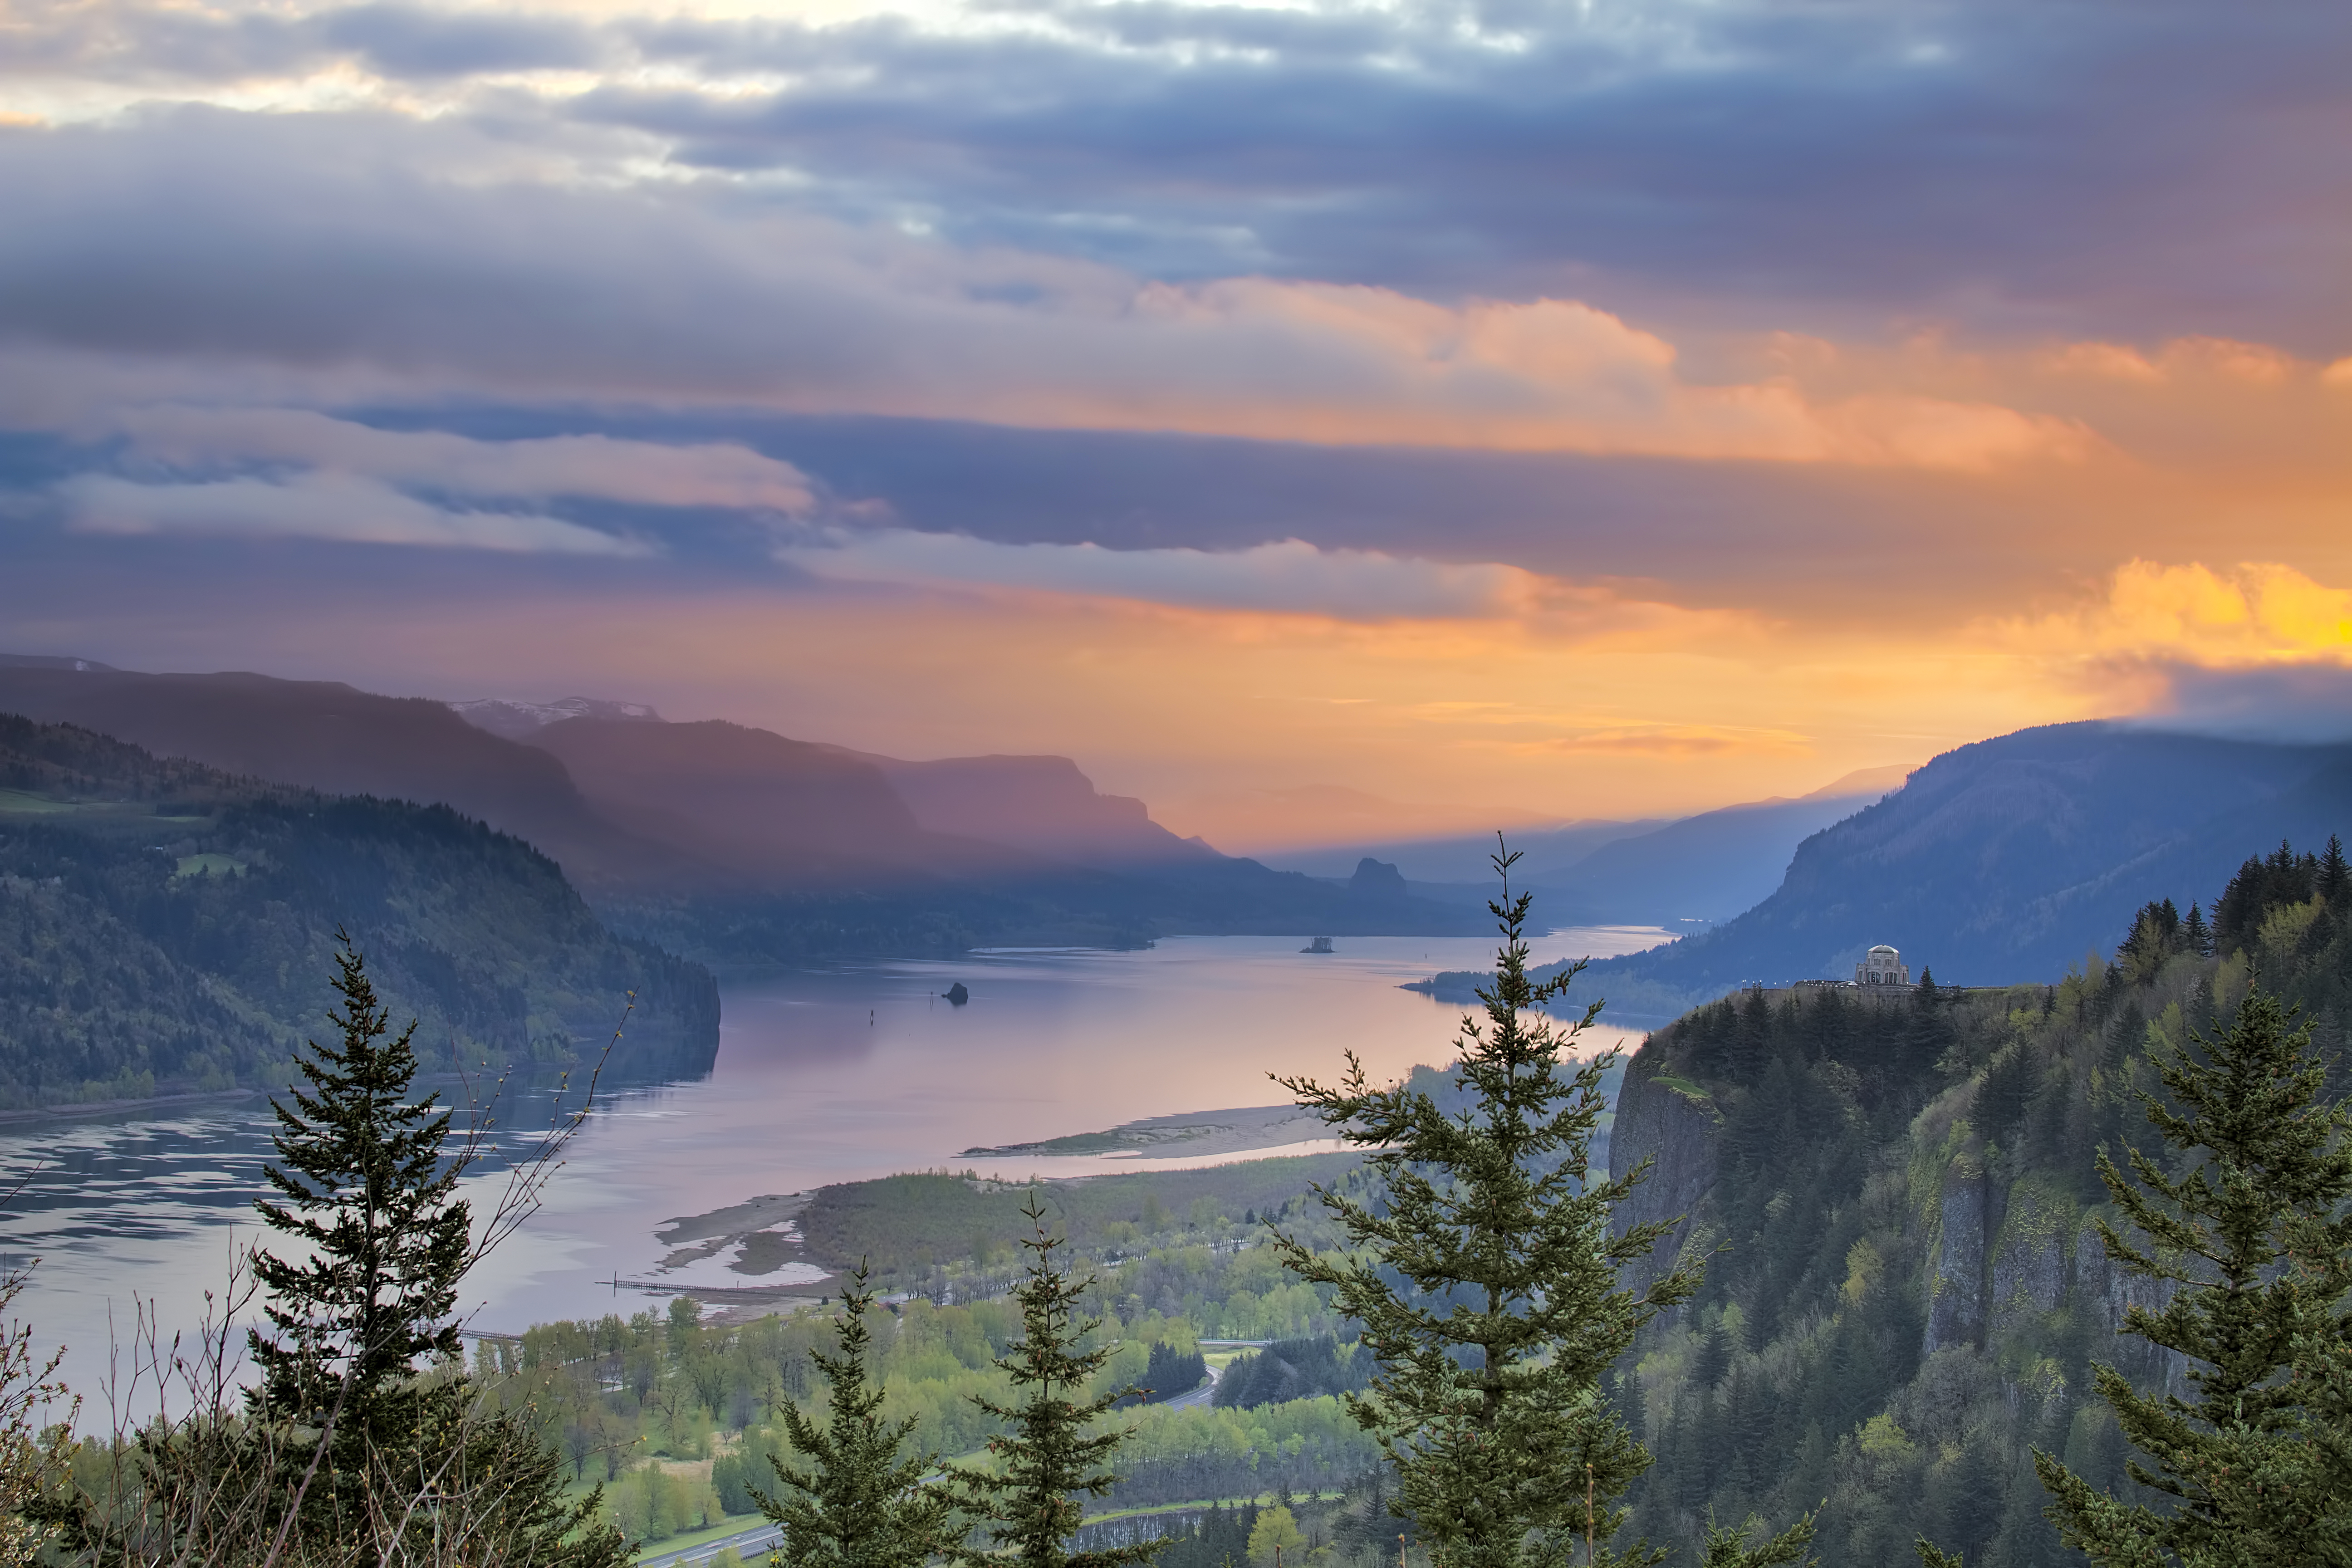 Plan Your Family Vacation in Oregon with My Travel Guide - Columbia River Gorge